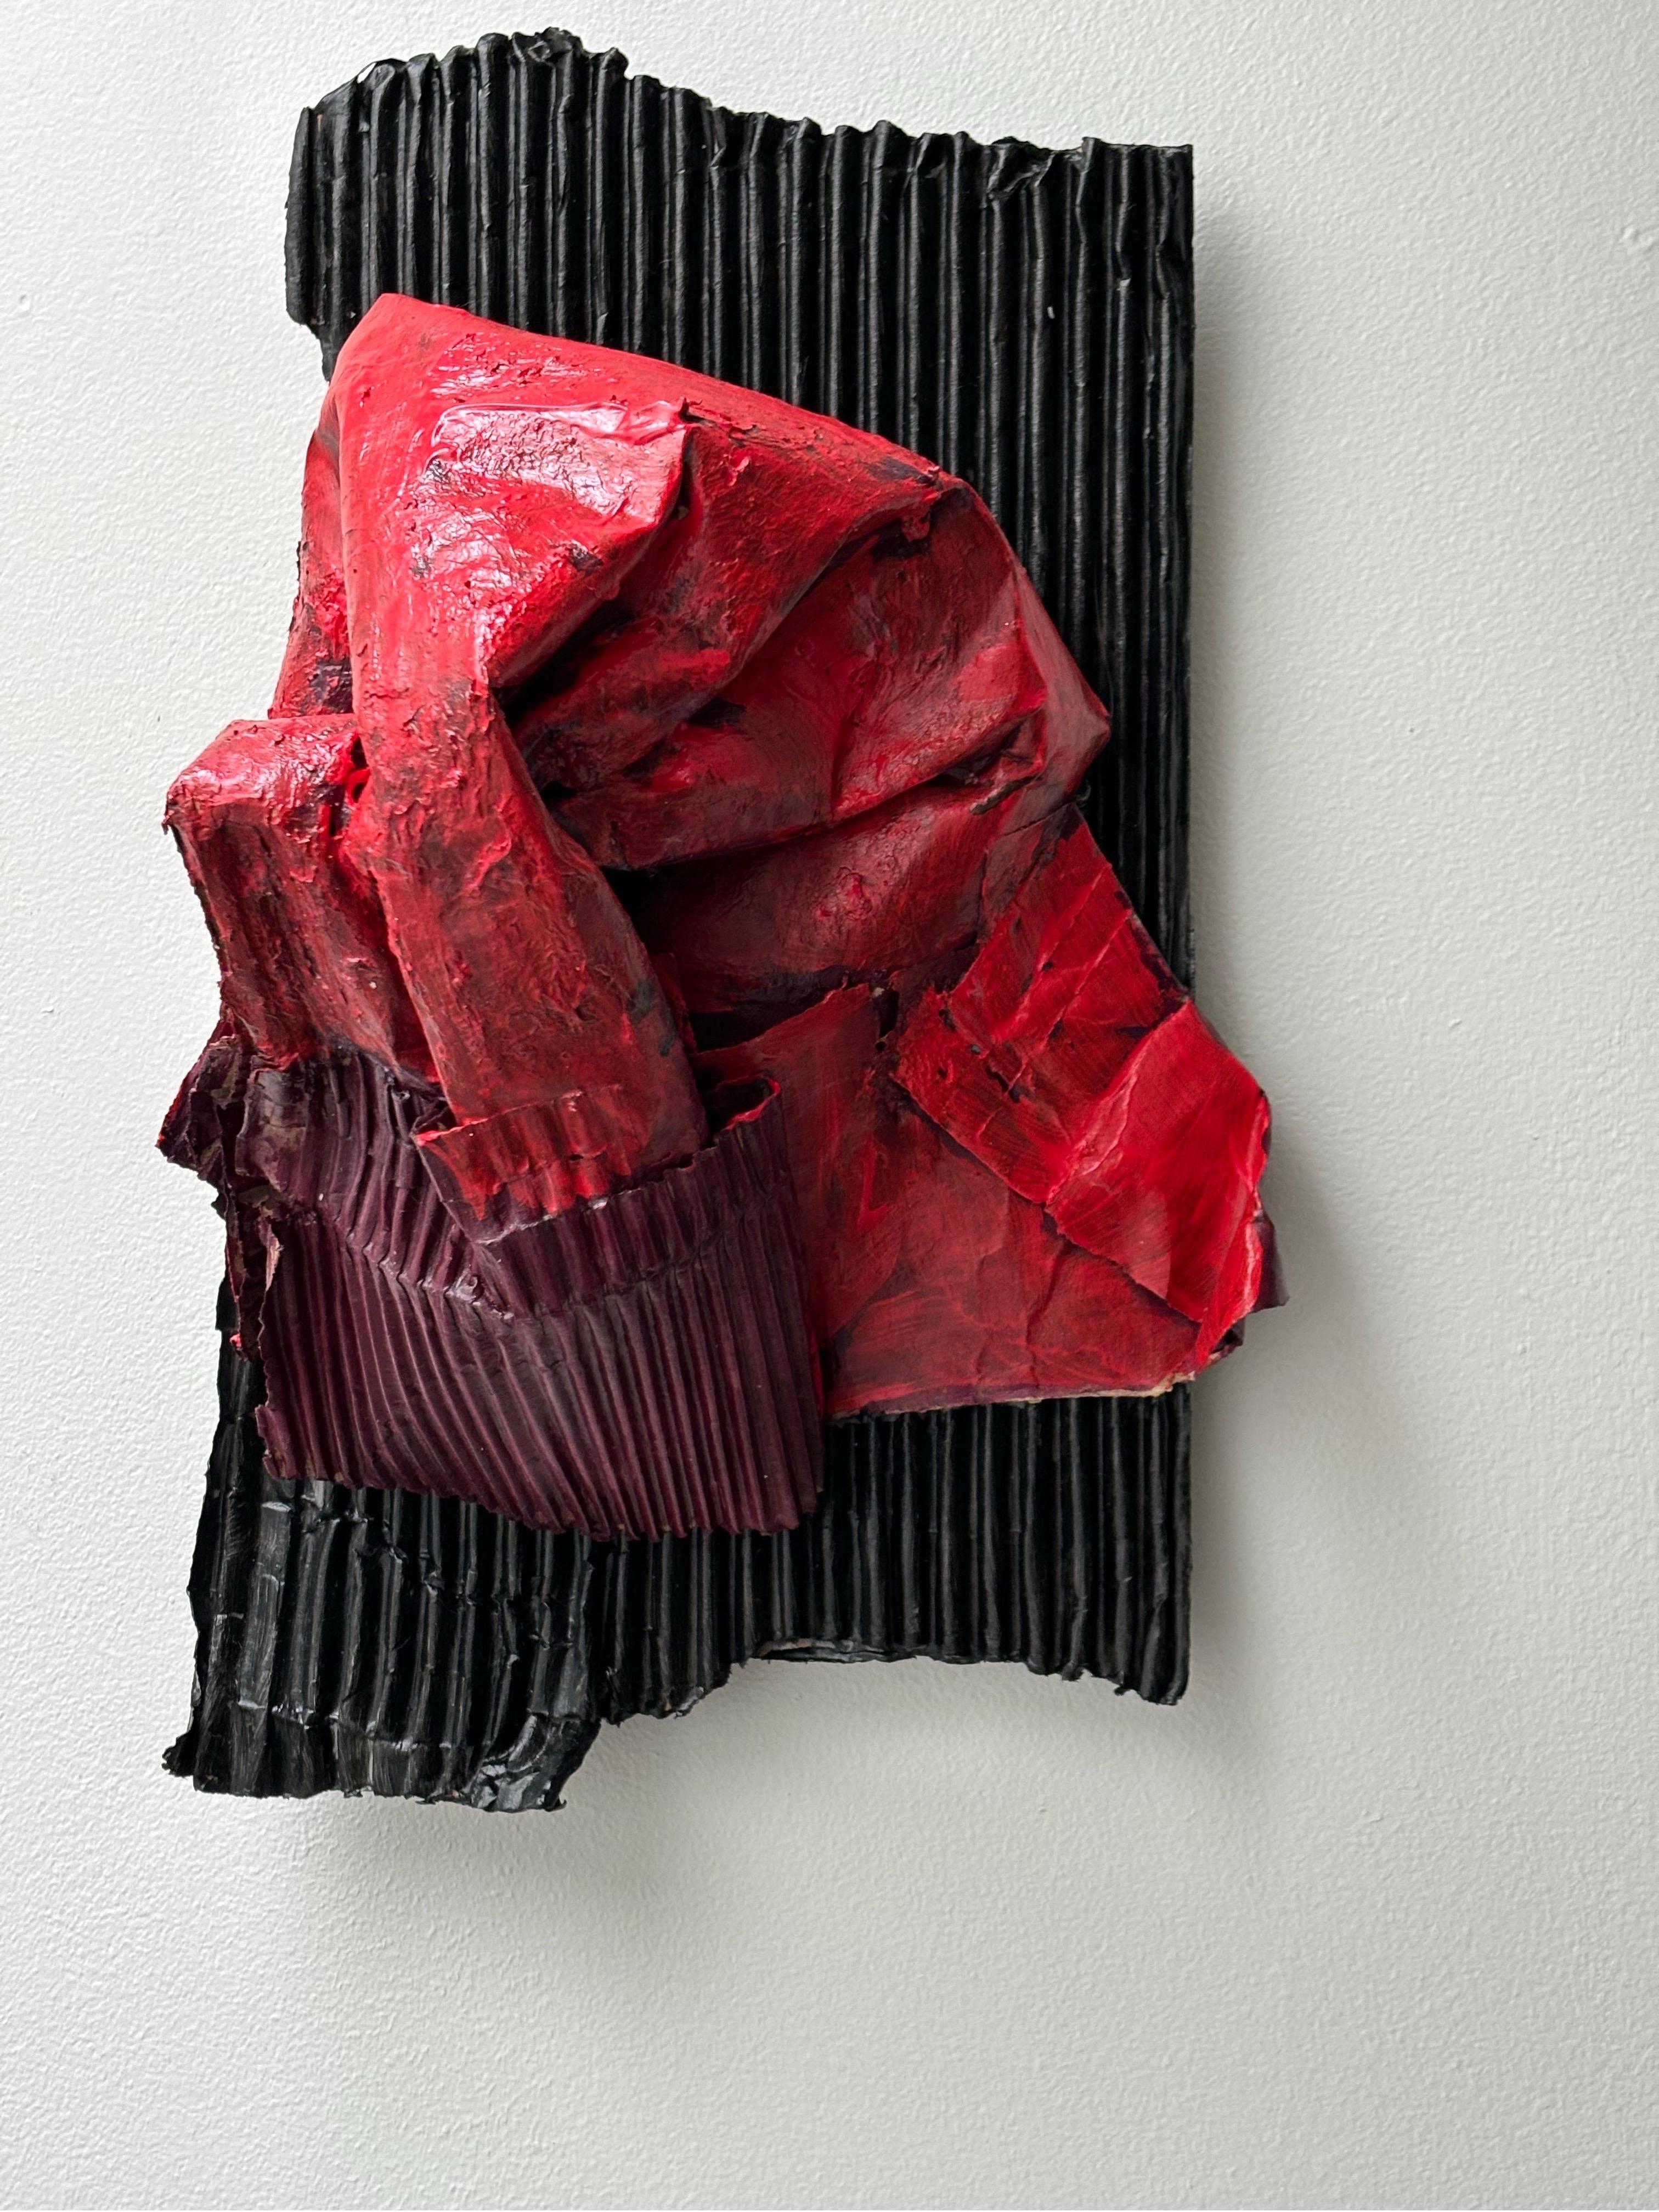 Artist: Jeanne Gentry Keck
Title: Sculpture Series / Amazon and Me XXVII
Size: 16 x 11 x 6.5 Inches
Medium: Mixed Media Wall Sculpture
Year: 2021

Fun piece, colorful, sculptural, conversation piece, corrugated cardboard, mixed media, acrylic paint.